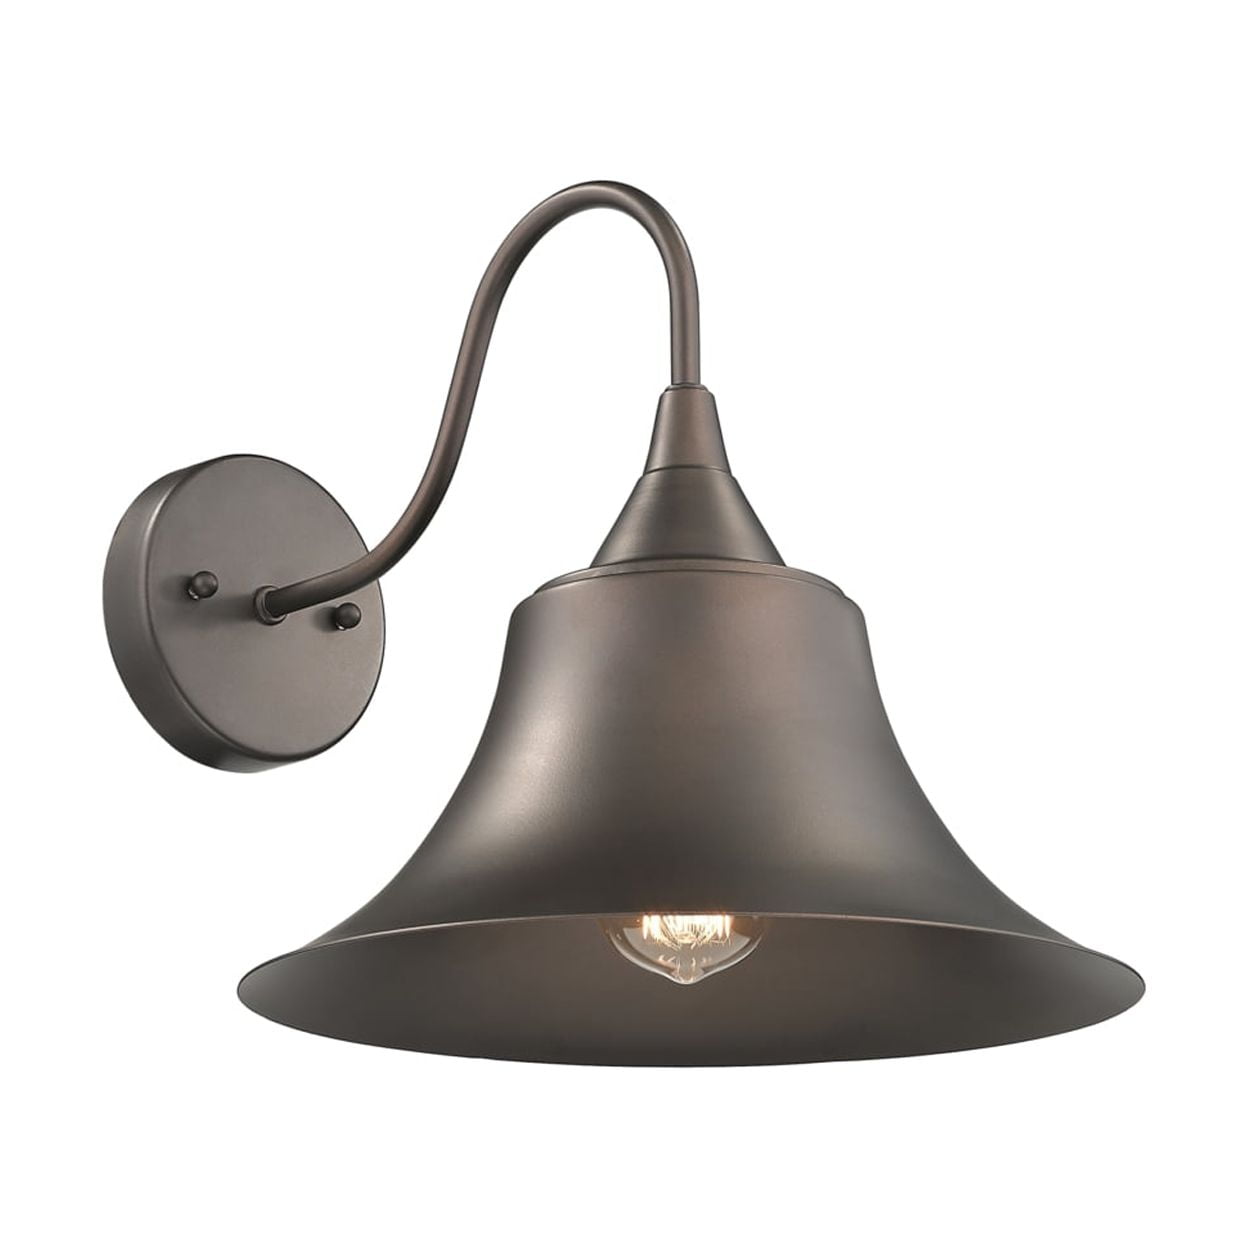 Ch2d006rb12-ws1 Ironclad Industrial 1 Light Rubbed Bronze Wall Sconce - 11.5 In.